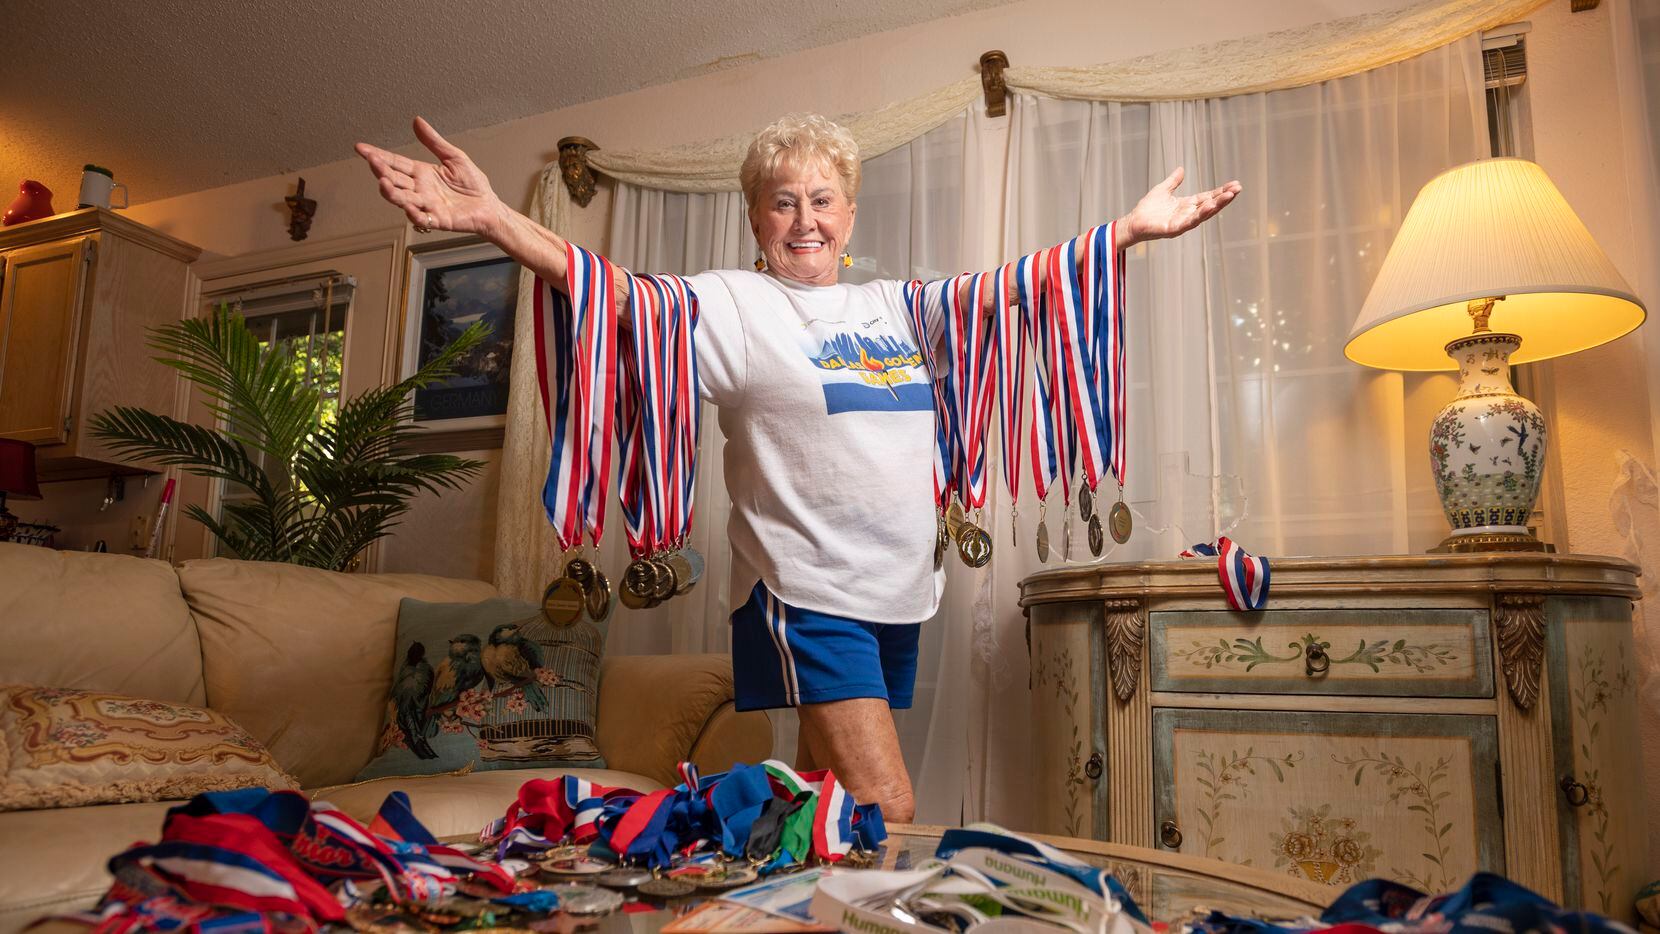 Kay Seamayer, 81, has the medals to prove her athletic skill. She’s in the lineup for a team of basketball players in their 80s heading to the National Senior Games in Florida in May.